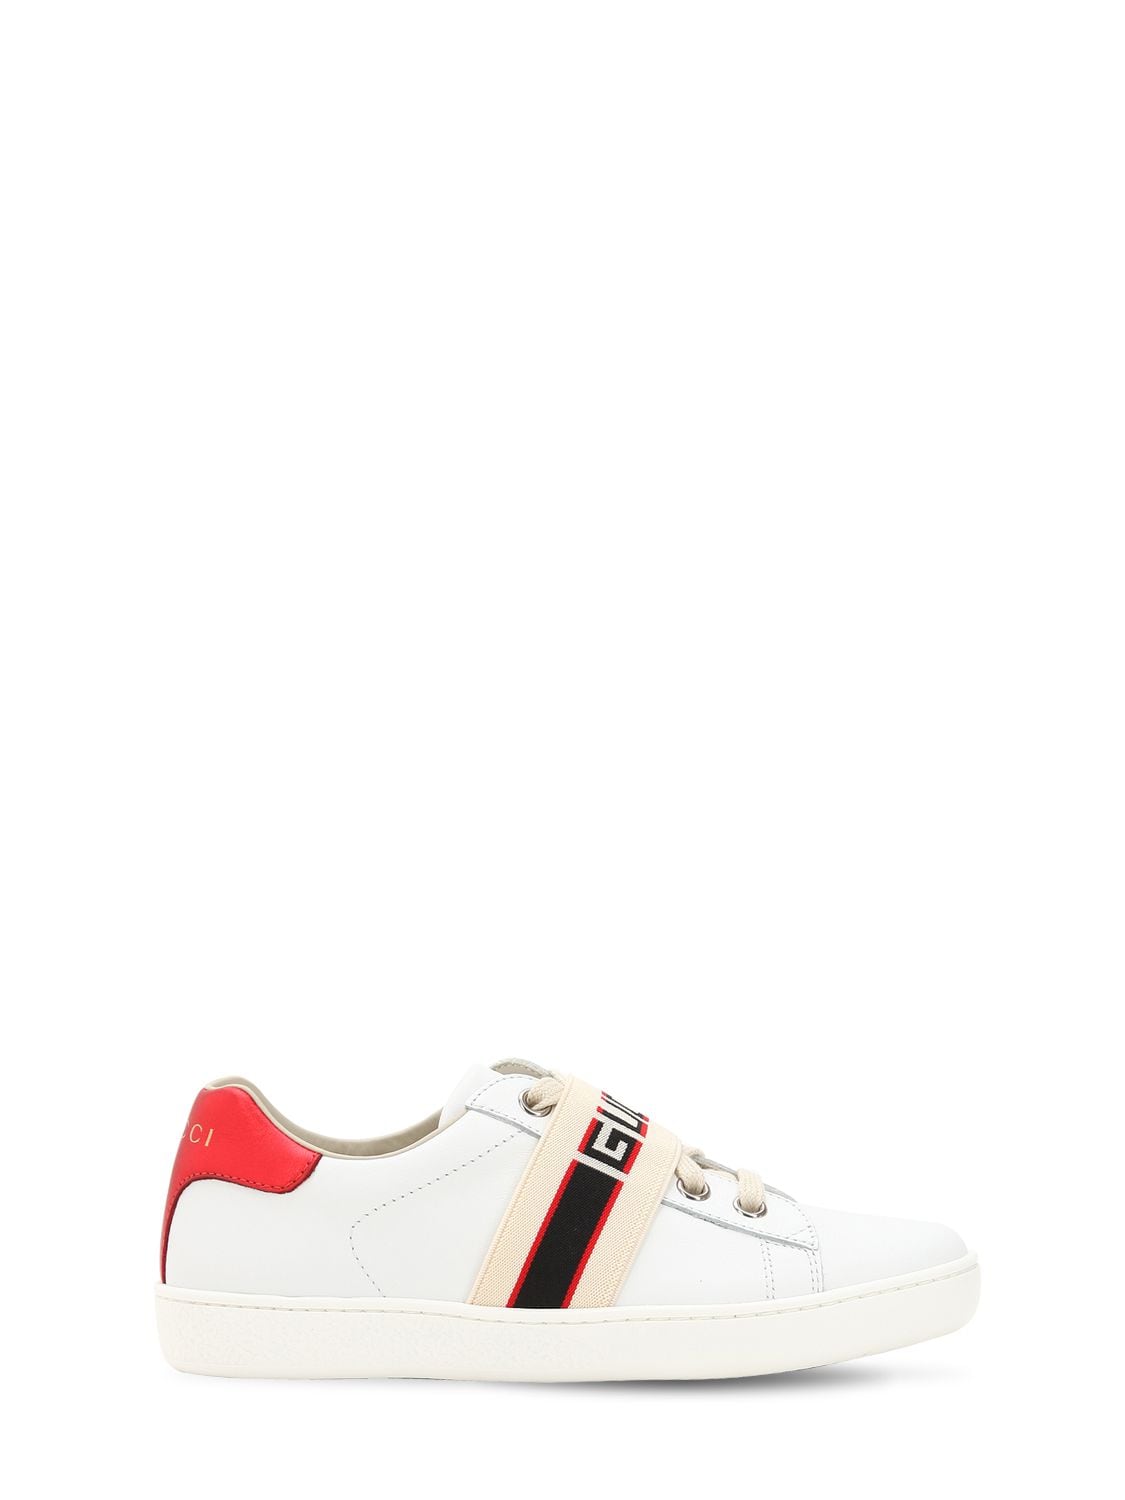 Gucci Kids' New Ace Metallic Leather Sneakers In White